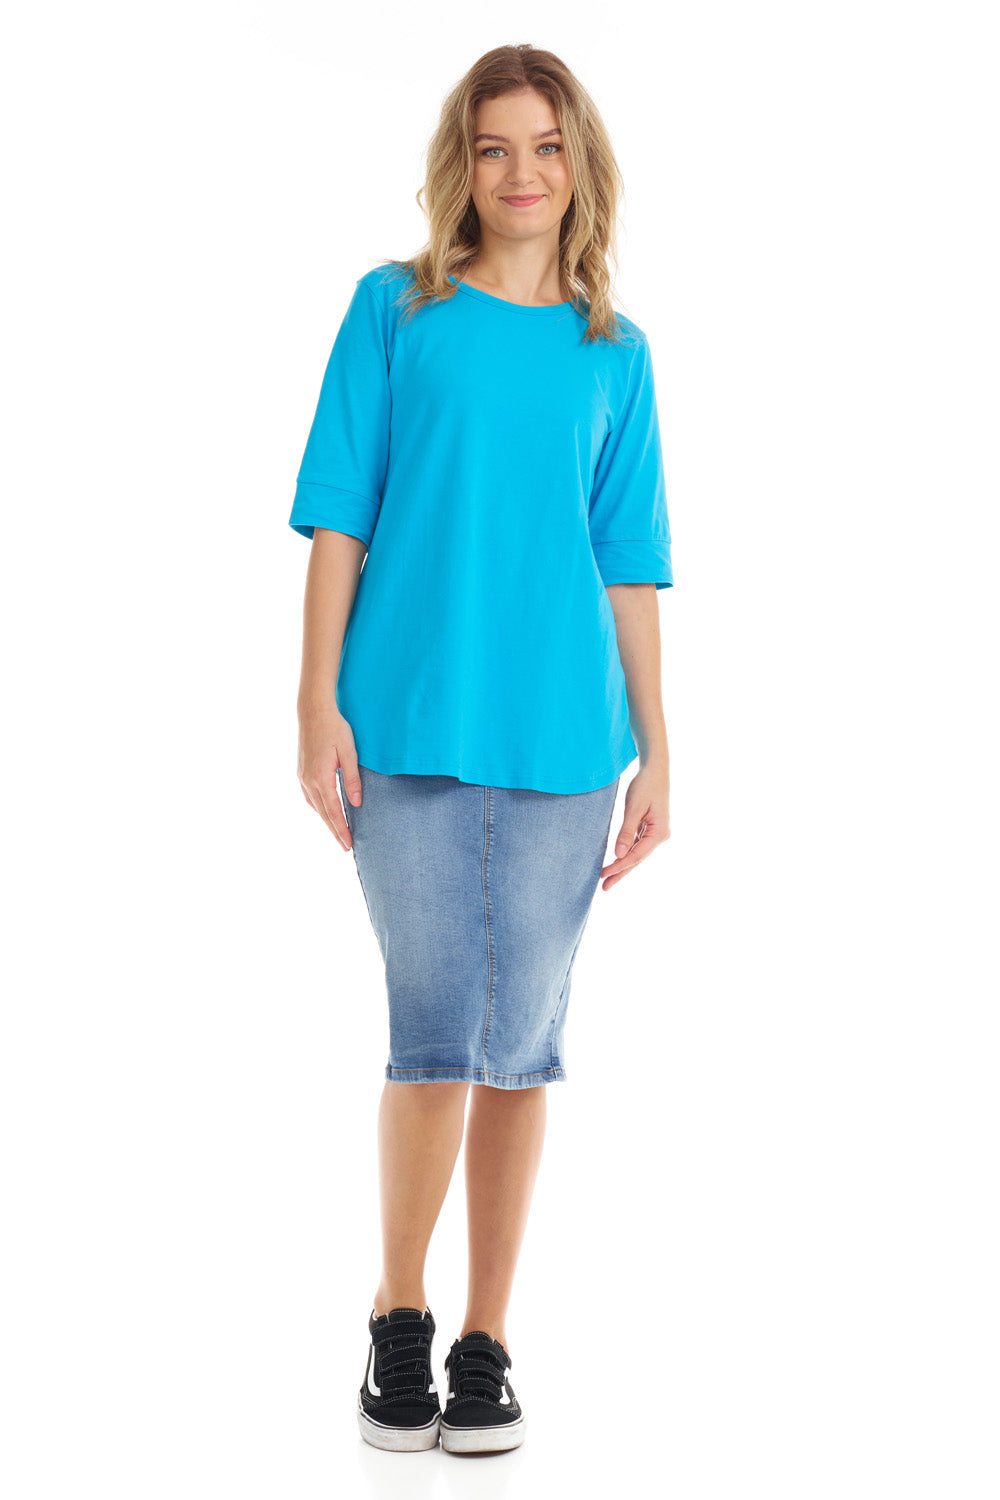 vibrant blue crew neck top for women with cuff sleeve